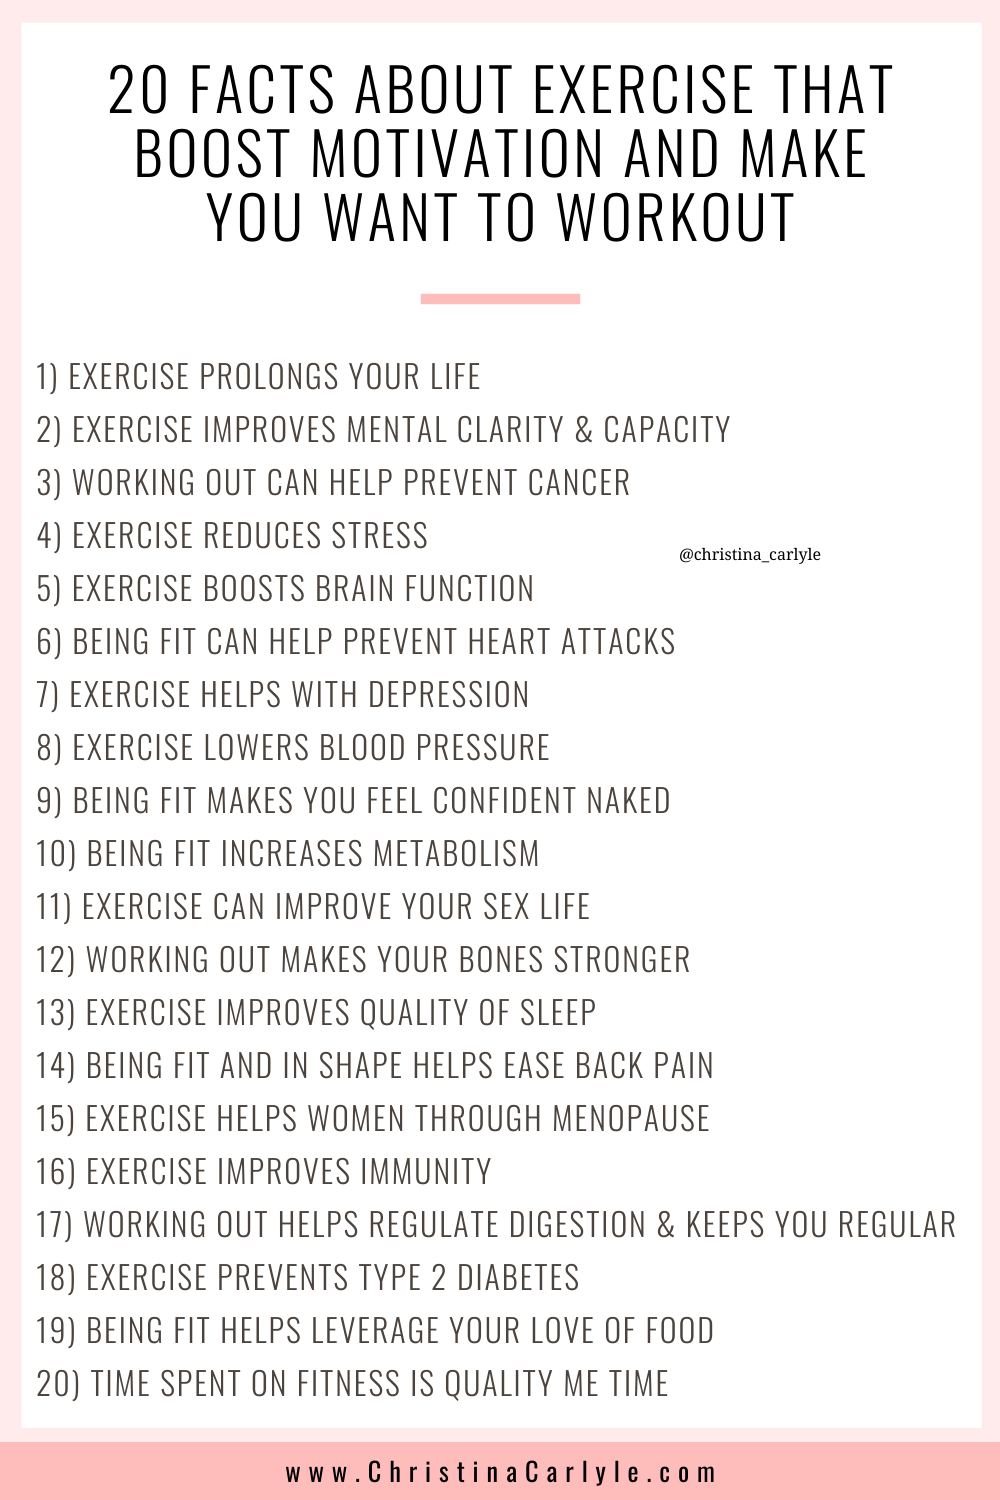 a list of 20 benefits of exercise and text that says 20 FACTS ABOUT EXERCISE THAT BOOST MOTIVATION AND MAKE YOU WANT TO WORKOUT